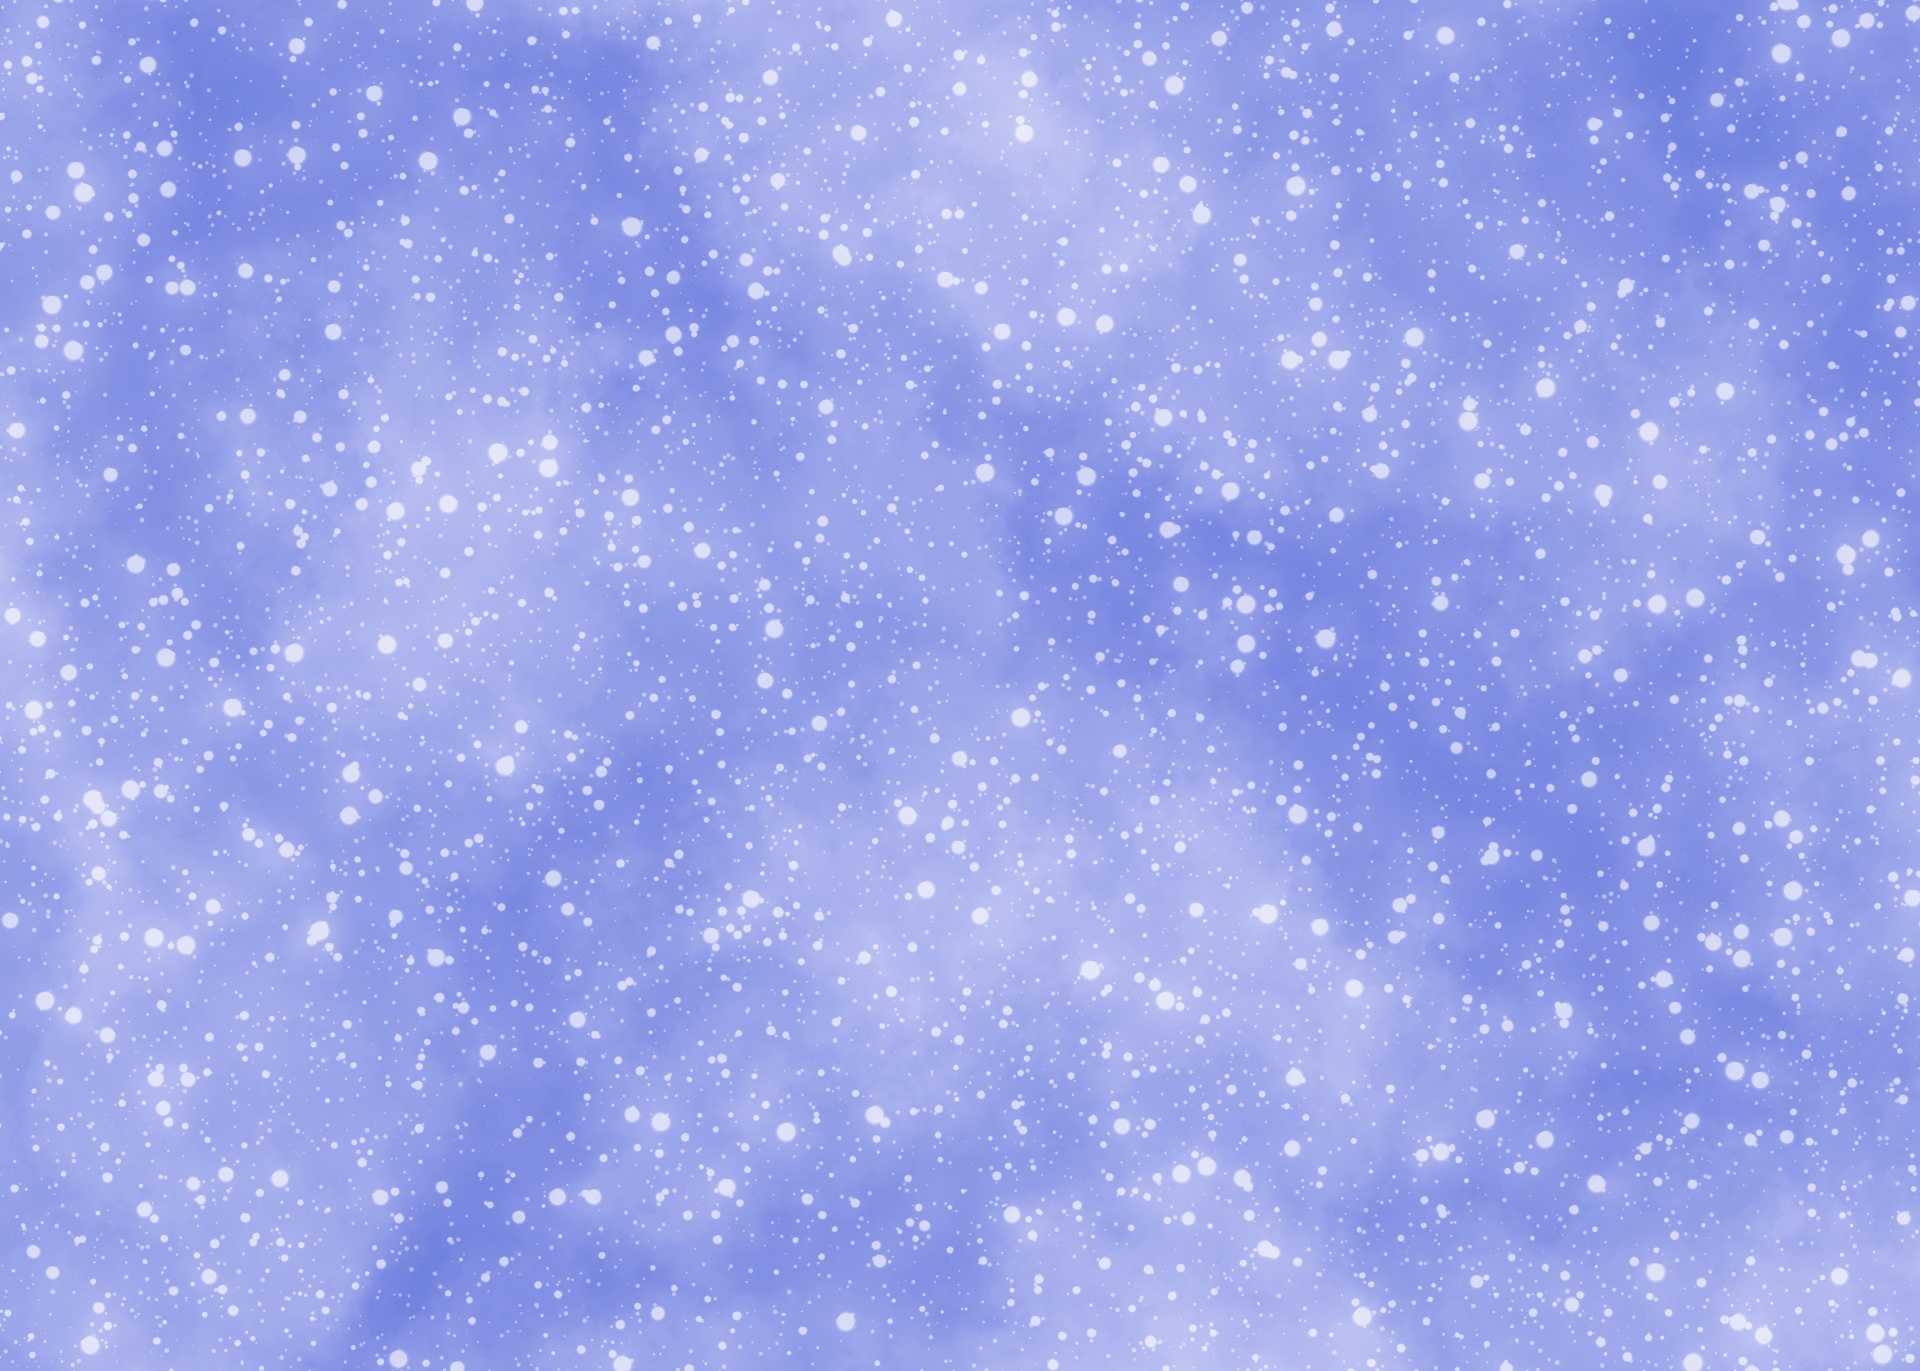 Snowflakes winter christmas paper background